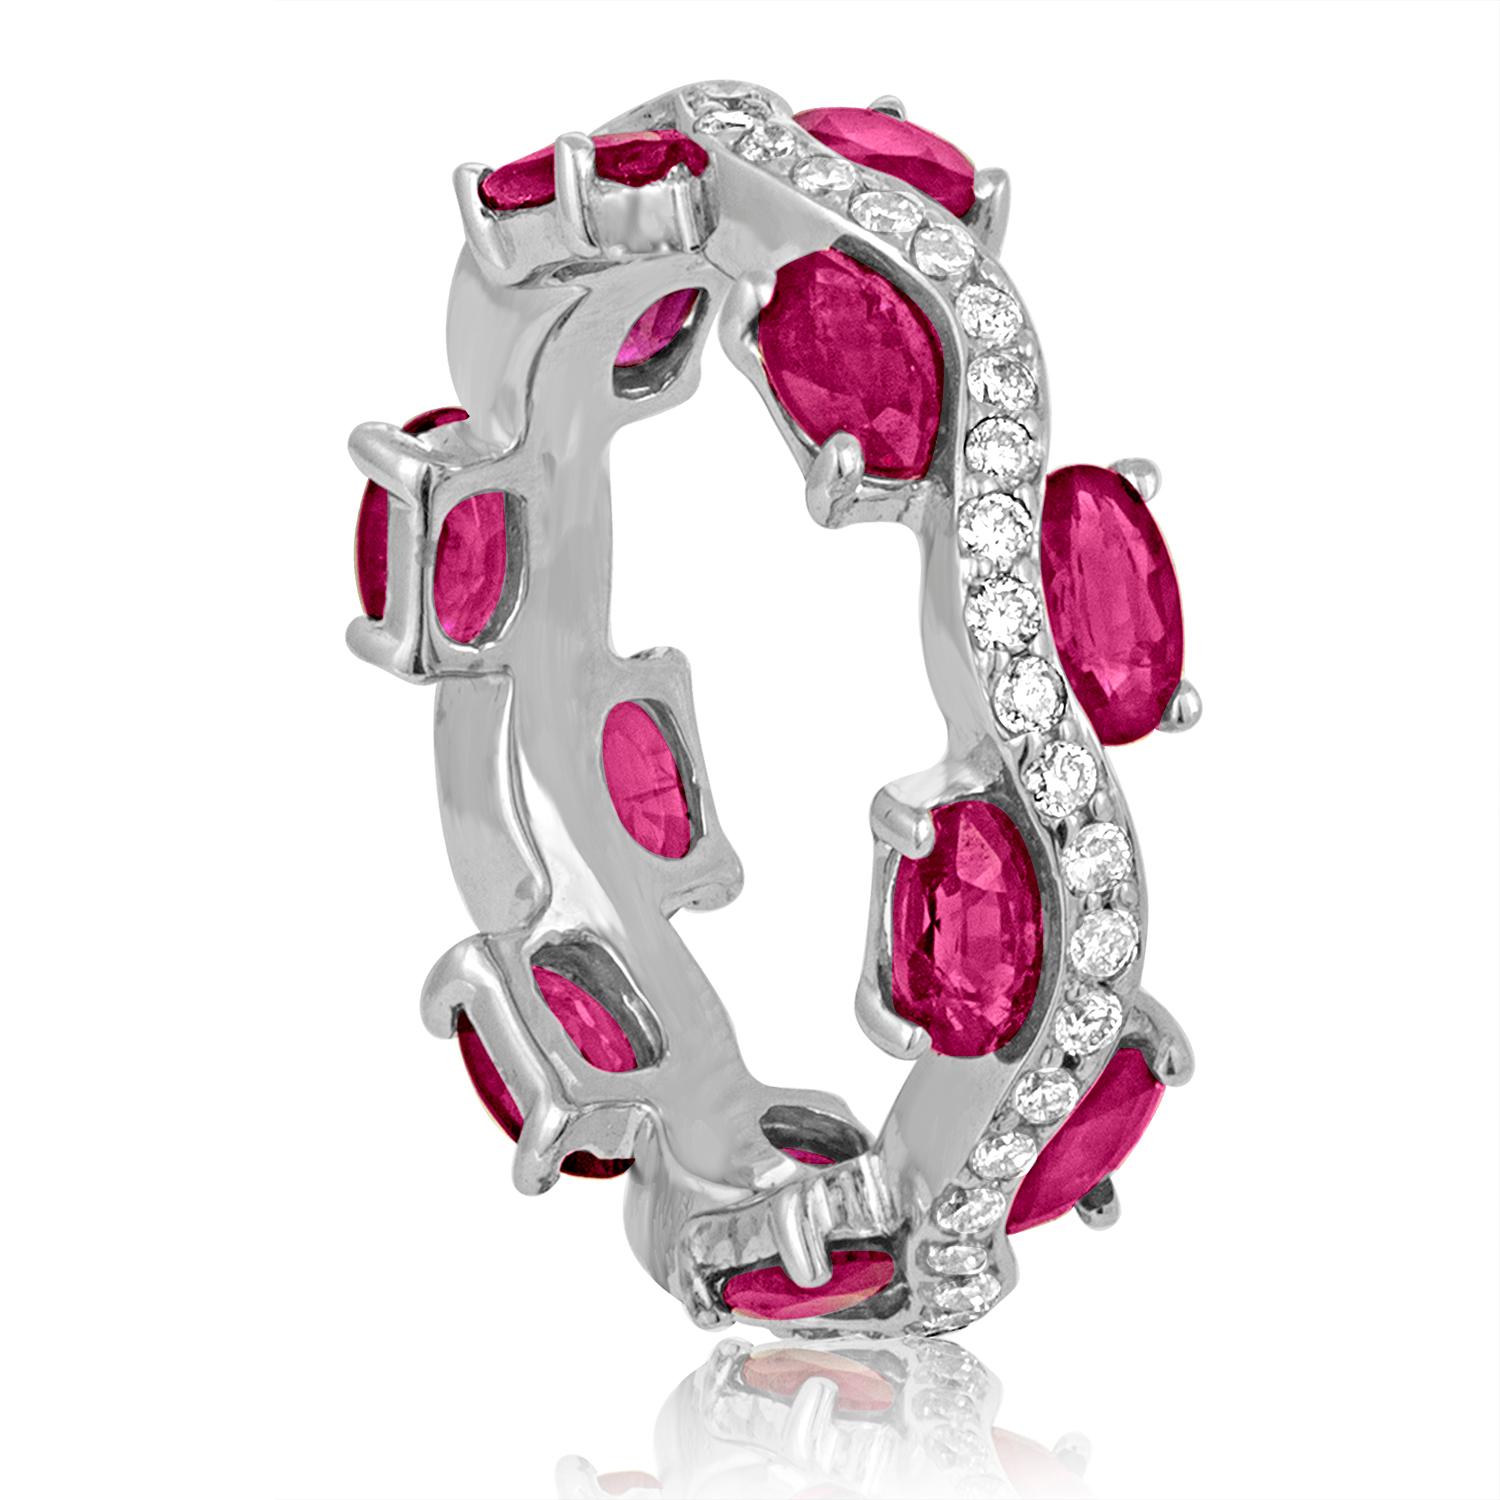 The ring is 18K White Gold
There are 2.00 Carats in Rubies
There are 0.50 Carats in Diamonds G SI
The ring weighs 5.4 grams
The ring is a size 6.5, not sizable